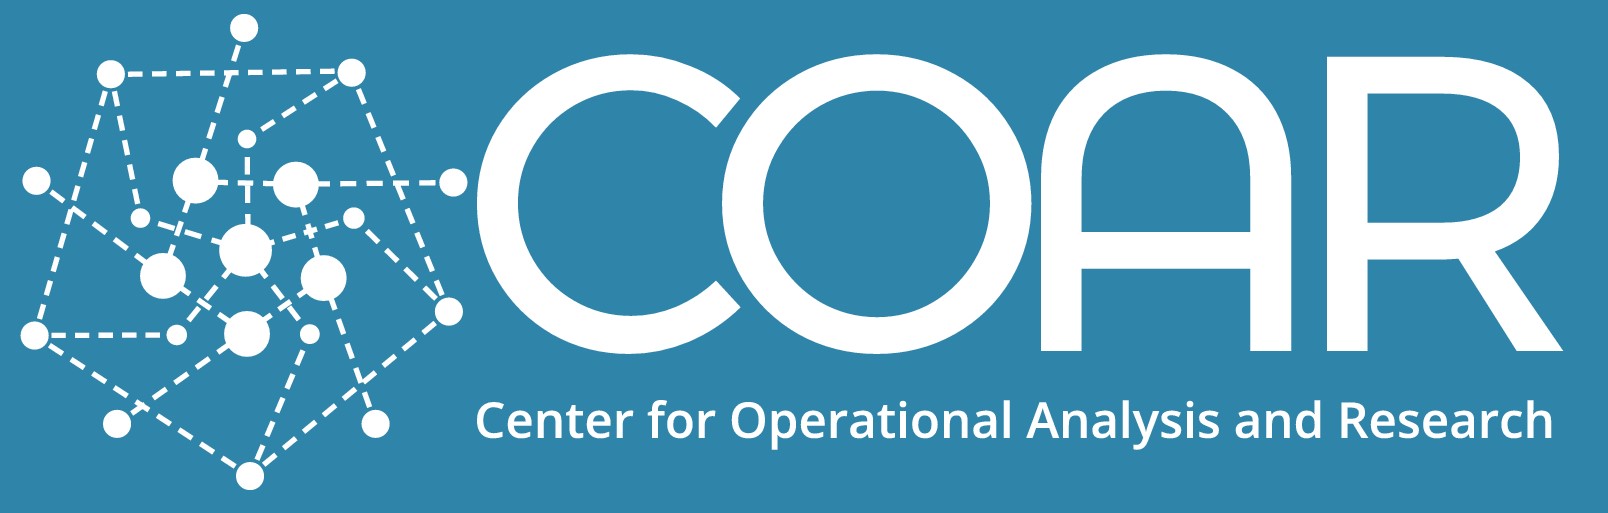 COAR - Center for Operational Analysis and Research